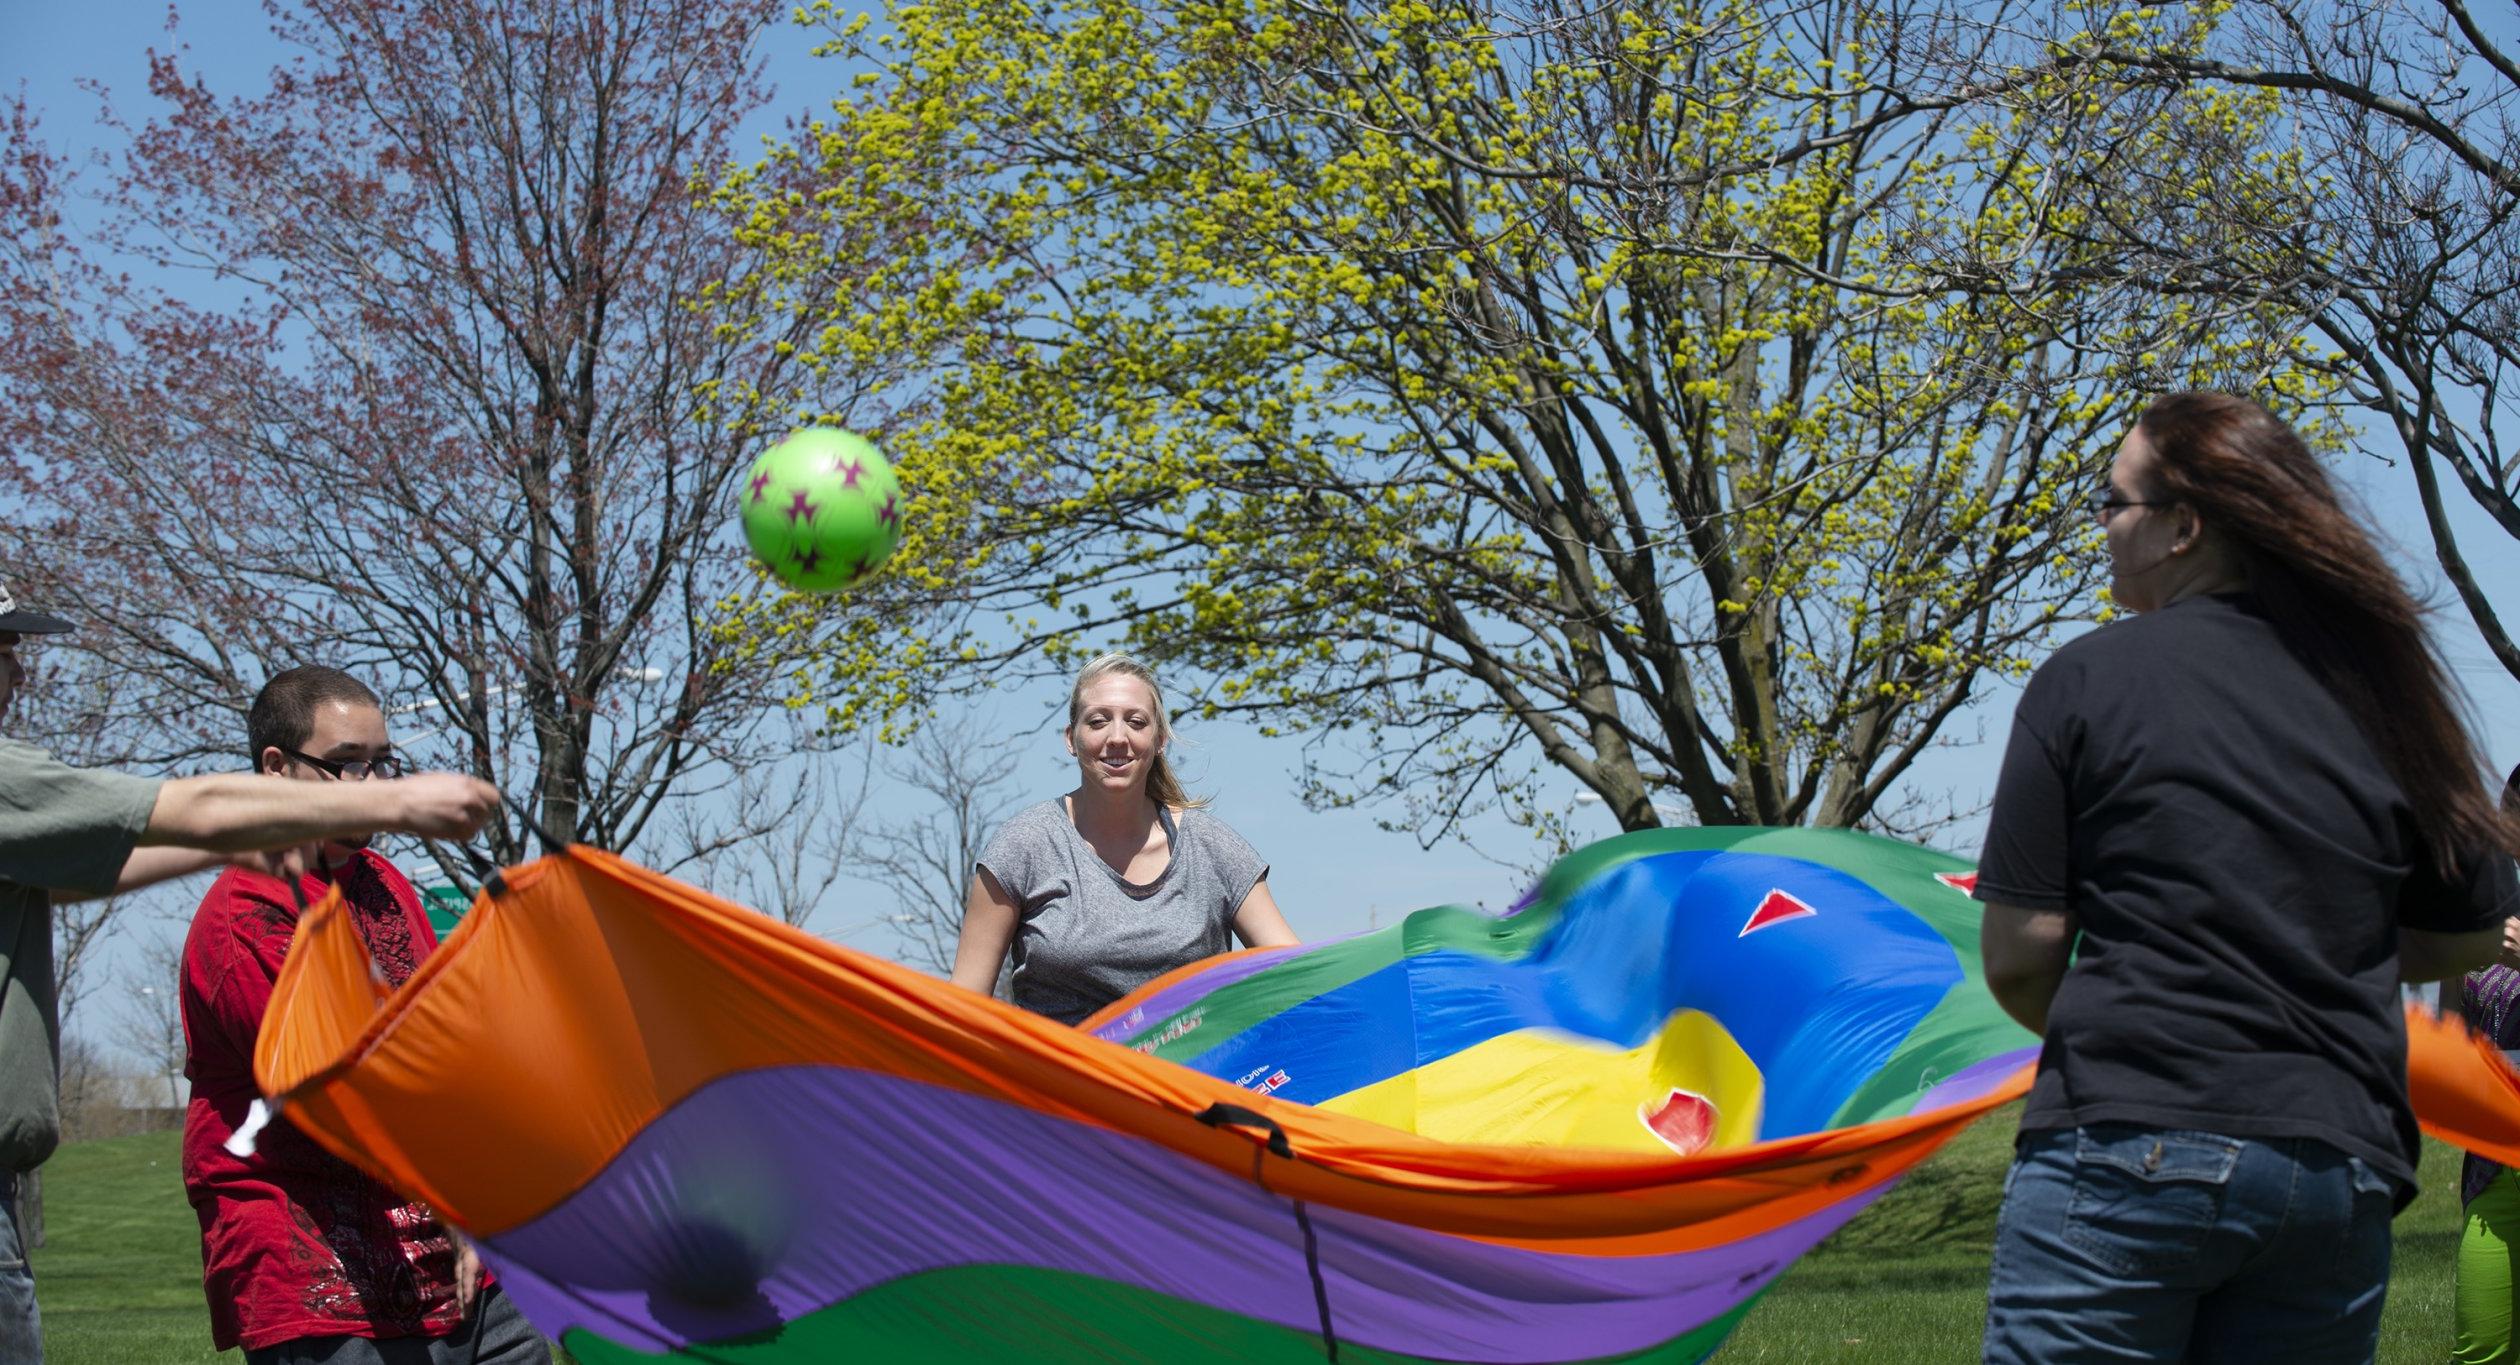 Occupational Therapy students at work with parachute and ball.